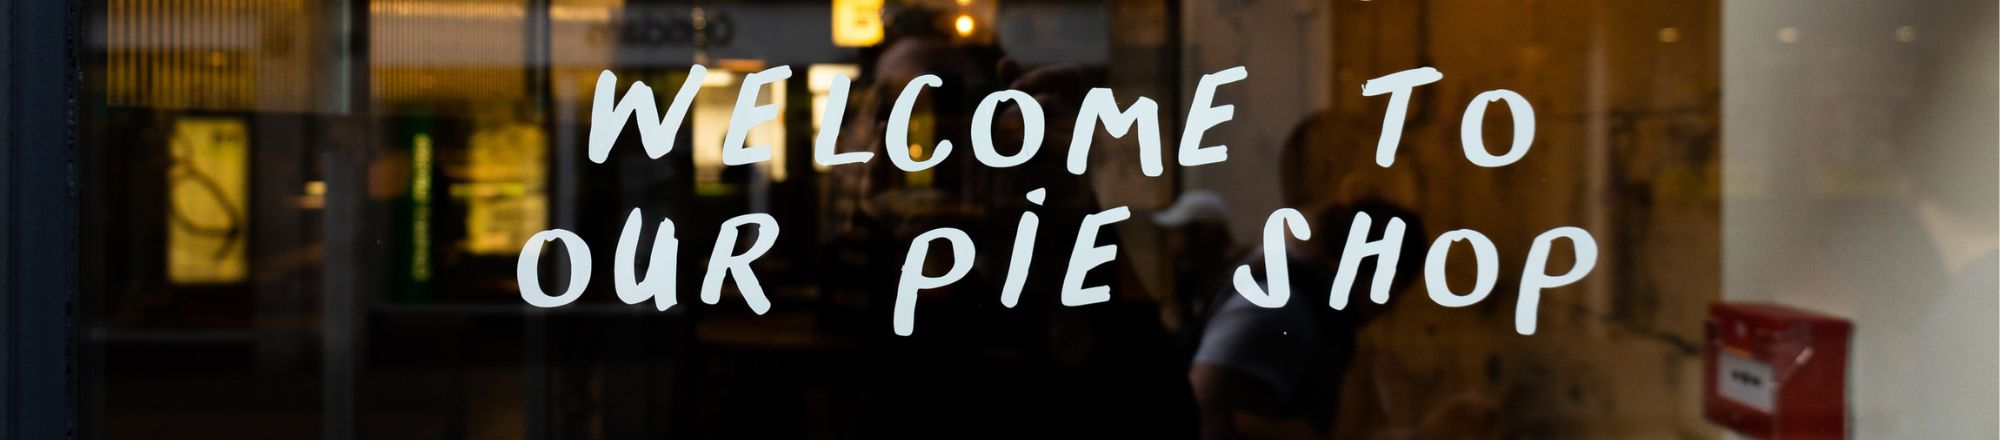 Welcome To Our Pie Shop